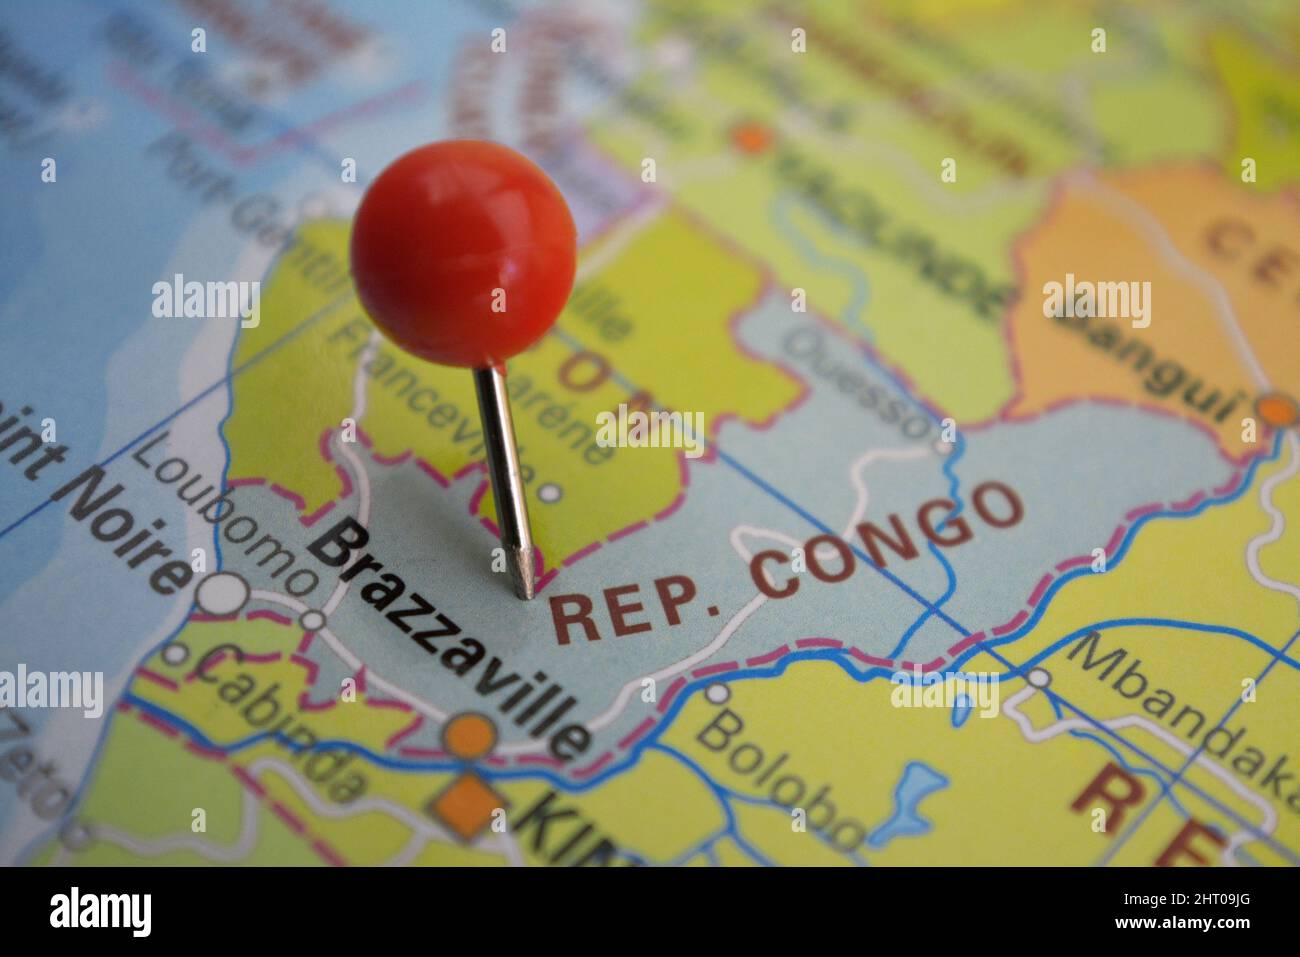 Pin in Republic Congo on map, Africa Stock Photo